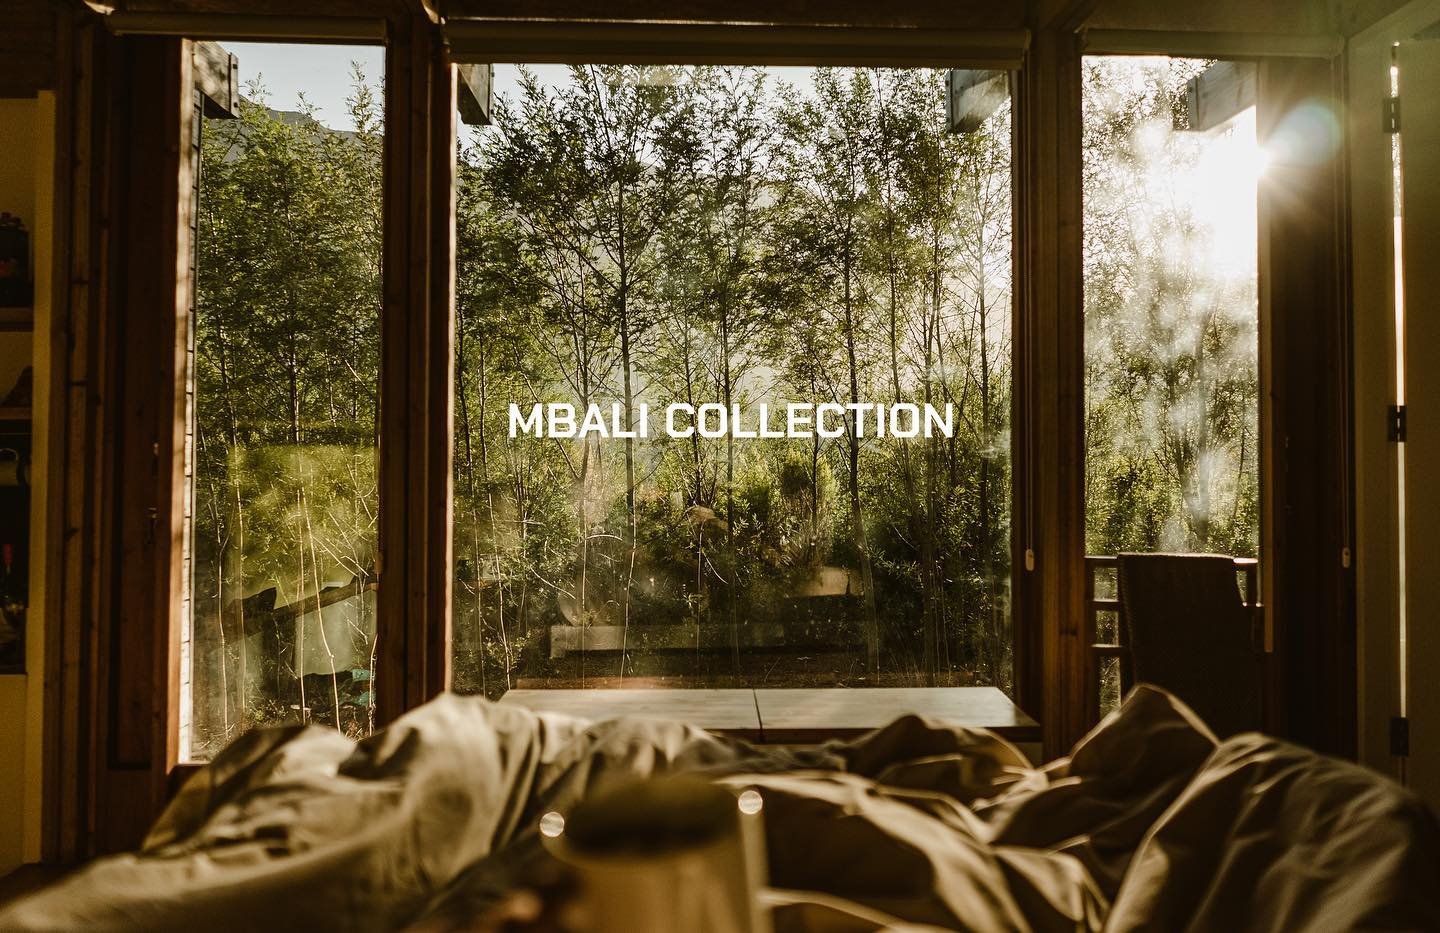 The Mbali Collection, located in Kogelberg Nature Reserve, Western Cape.

The 2-sleeper cabins consist of an open-plan bedroom, lounge, dining, and kitchen area with one bathroom. There is also an outdoor braai facility on the deck. With lots of acti